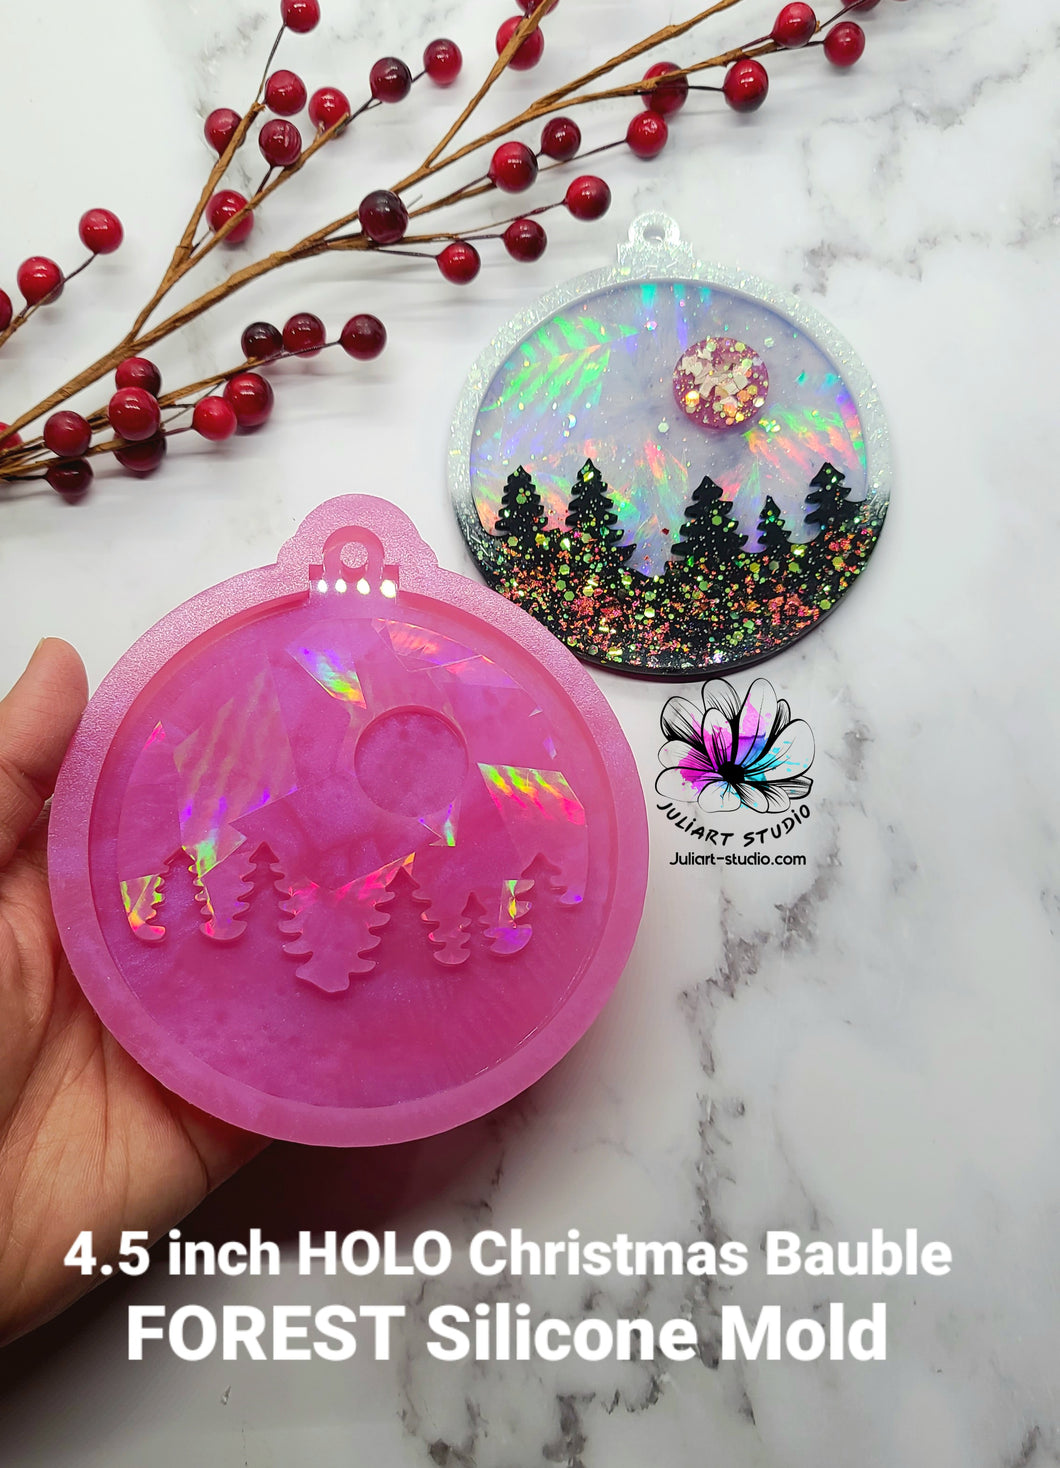 4.5 inch HOLO Christmas Bauble FOREST Silicone Mold for Resin